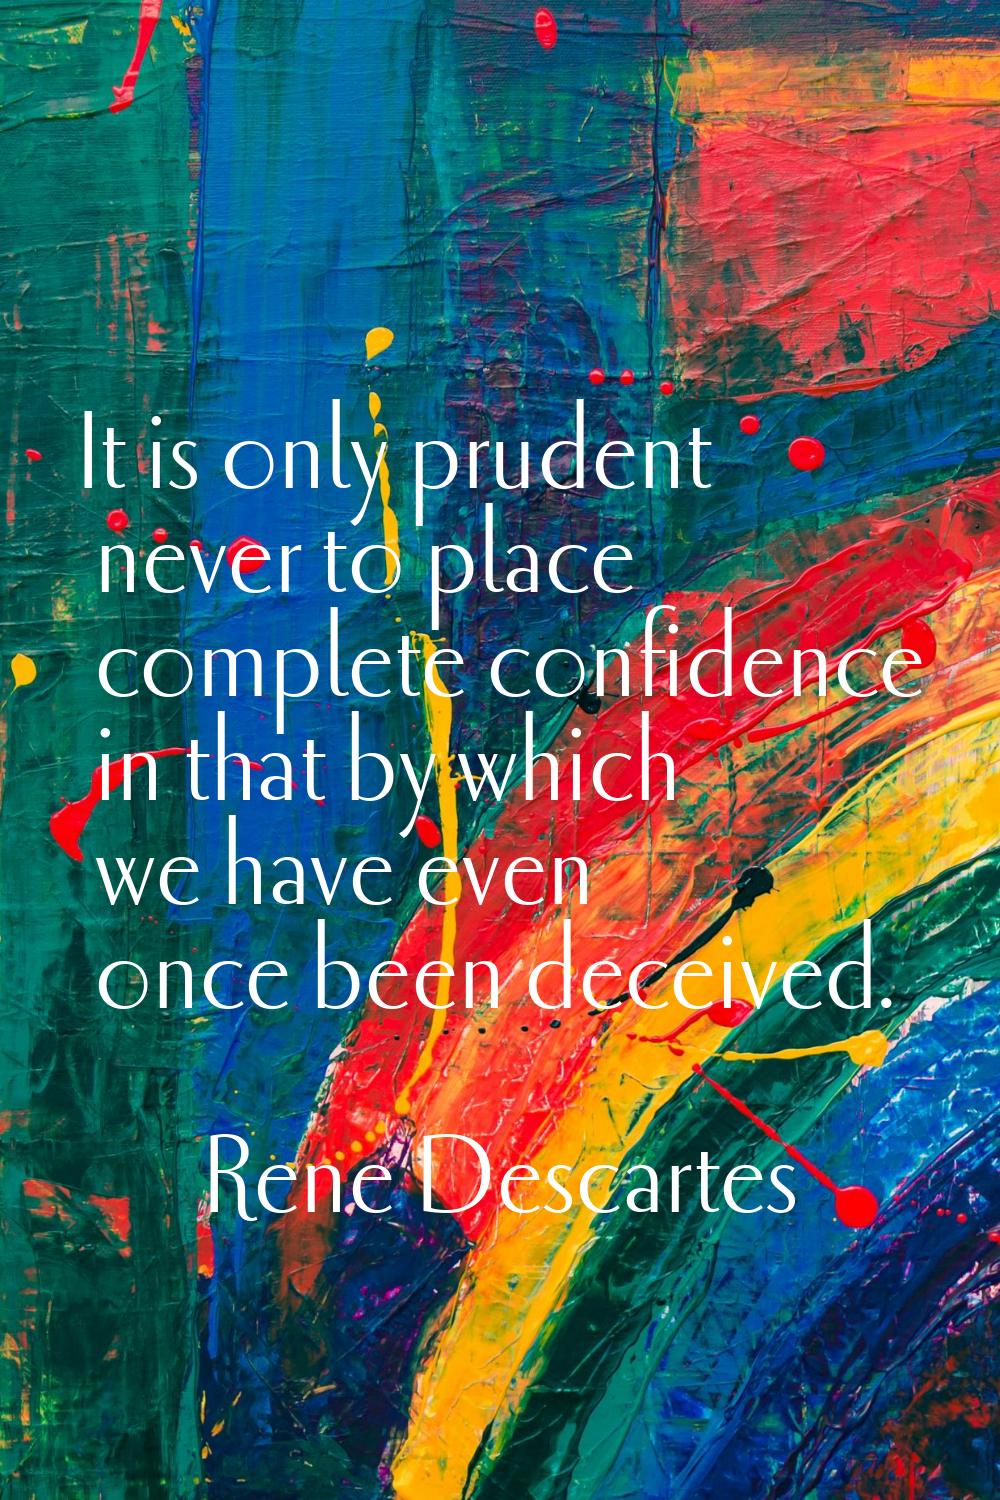 It is only prudent never to place complete confidence in that by which we have even once been decei